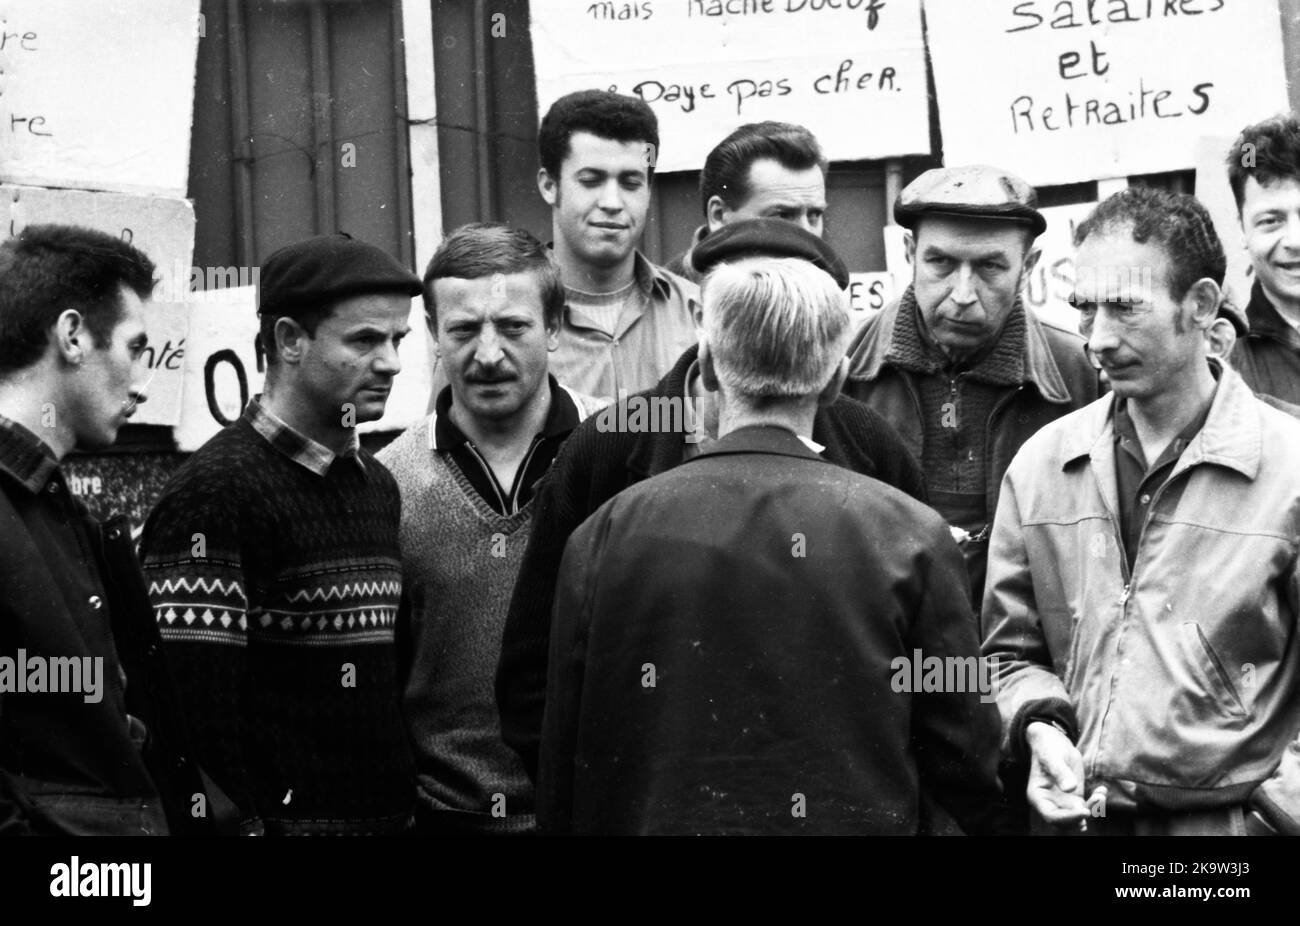 The general strike in France, here in Paris in May 1968, paralysed the whole country together with students and workers and employees, FRA, France Stock Photo